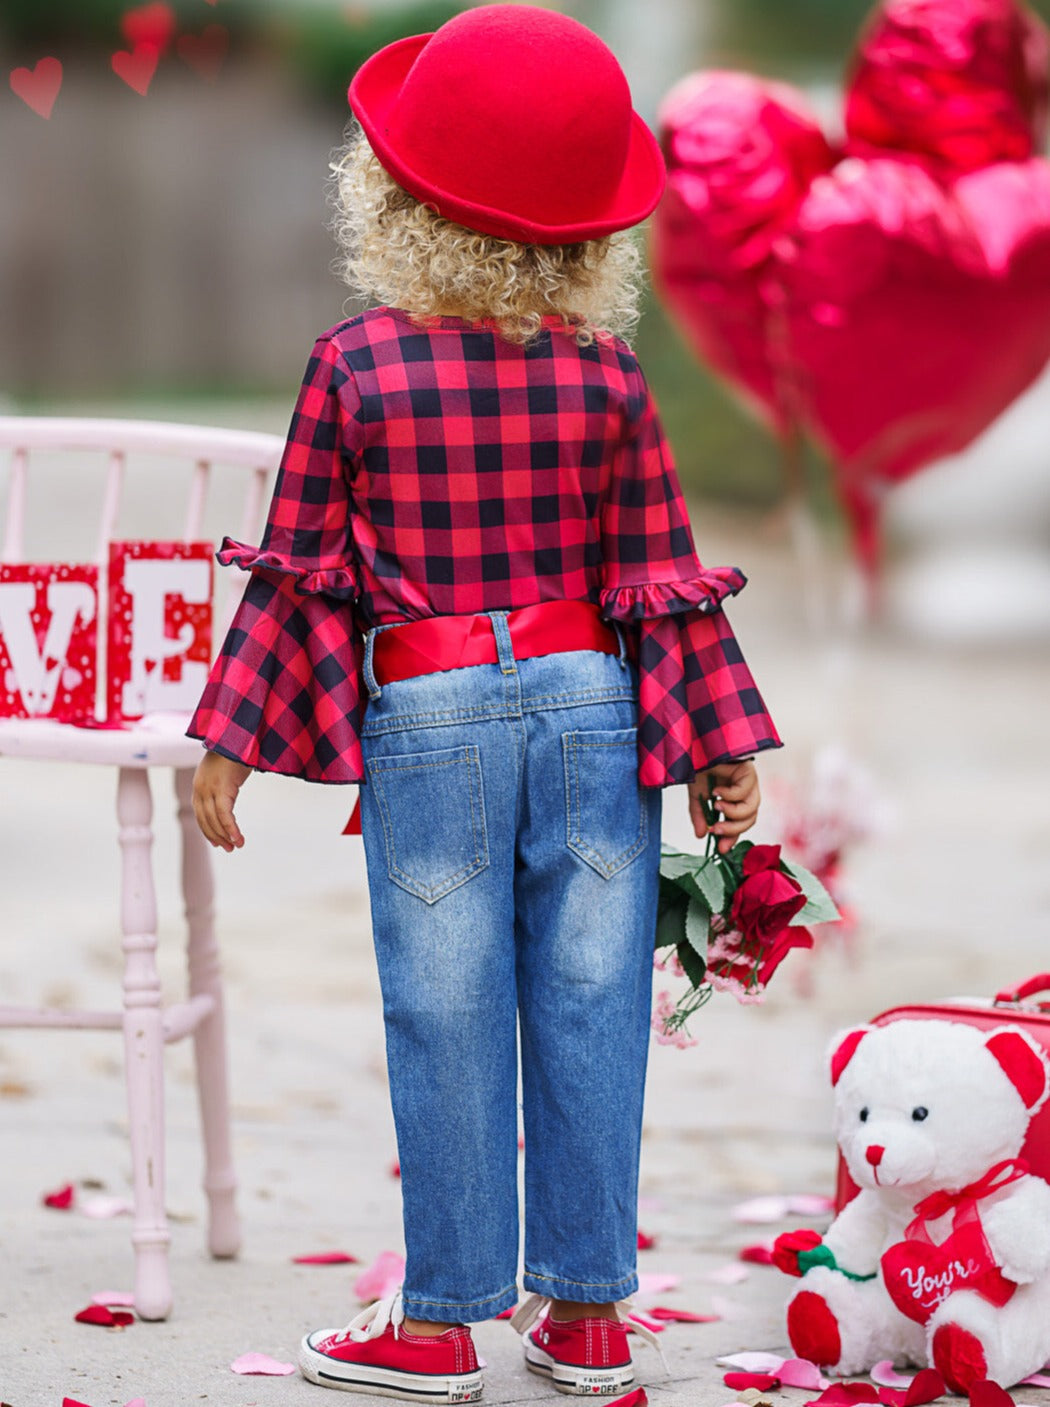 Kids Valentine's Clothes | Girls Plaid Bell Sleeve Top & Patched Jeans